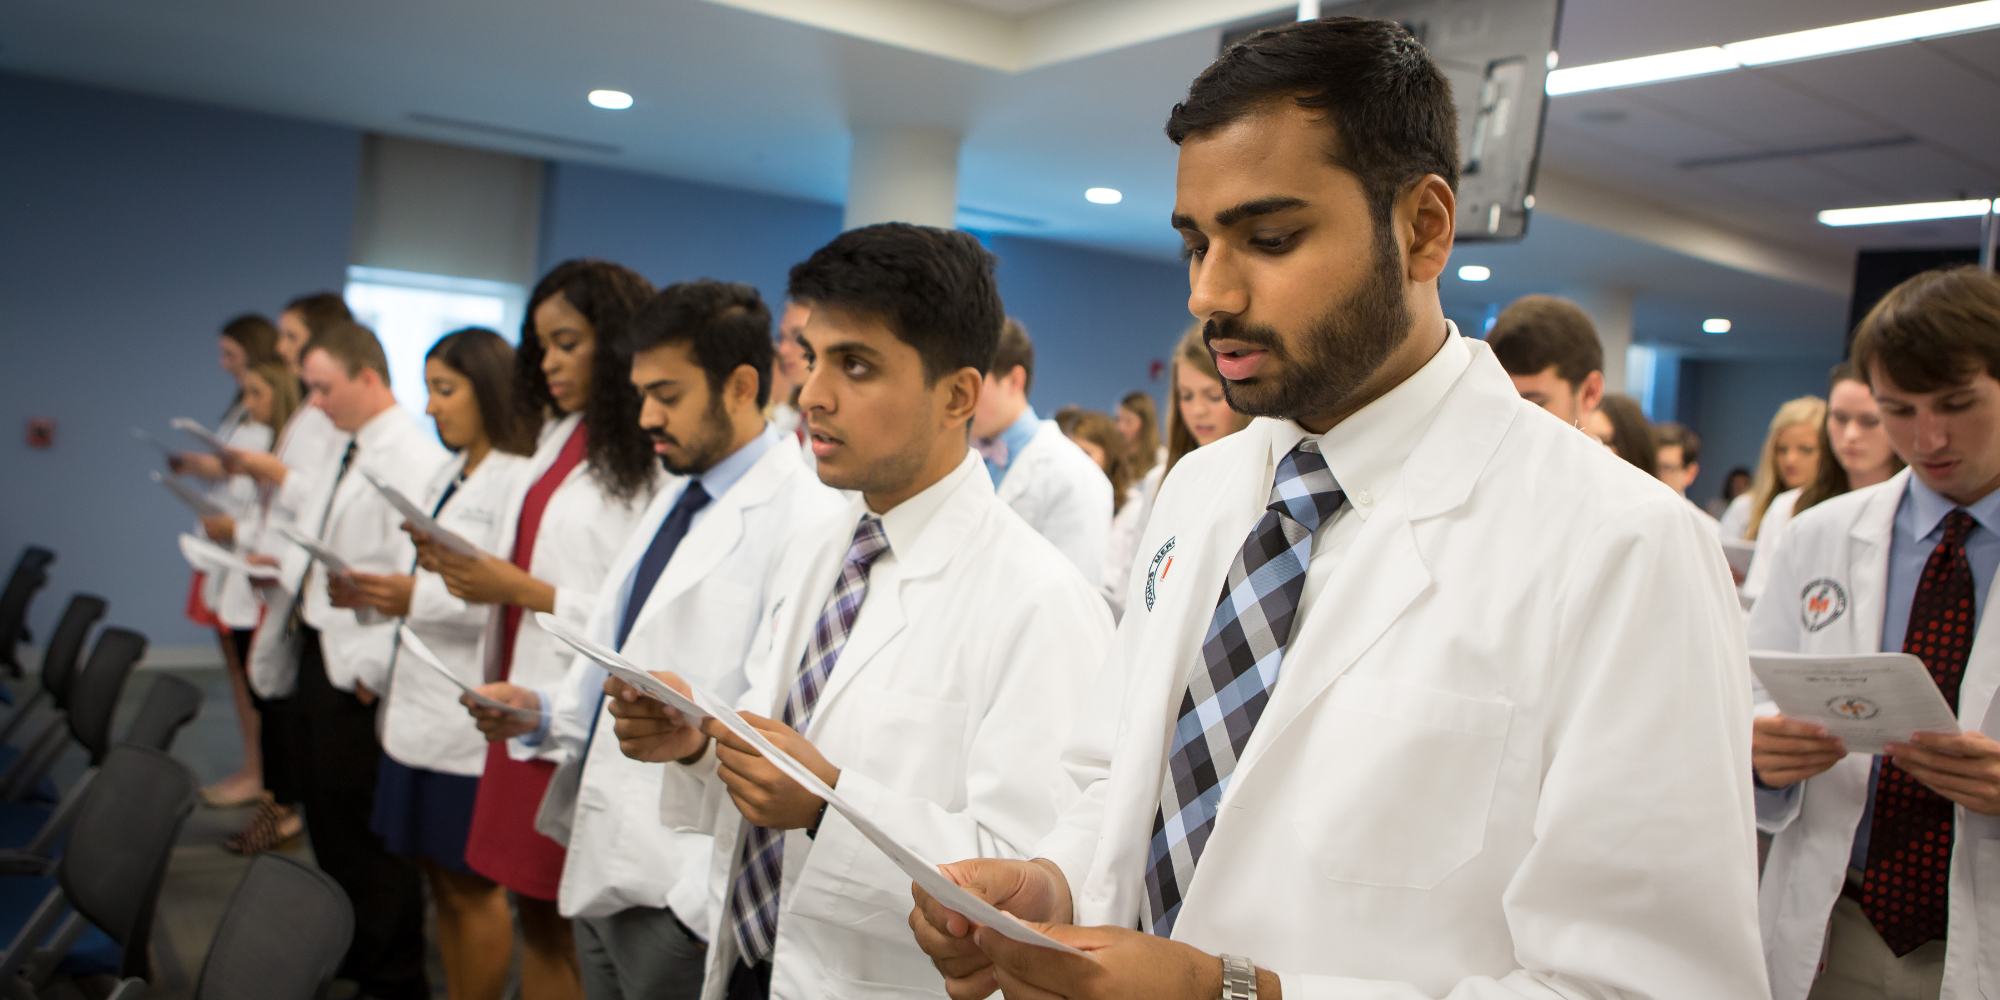 School of Medicine to Hold White Coat Ceremony in Savannah - The Den